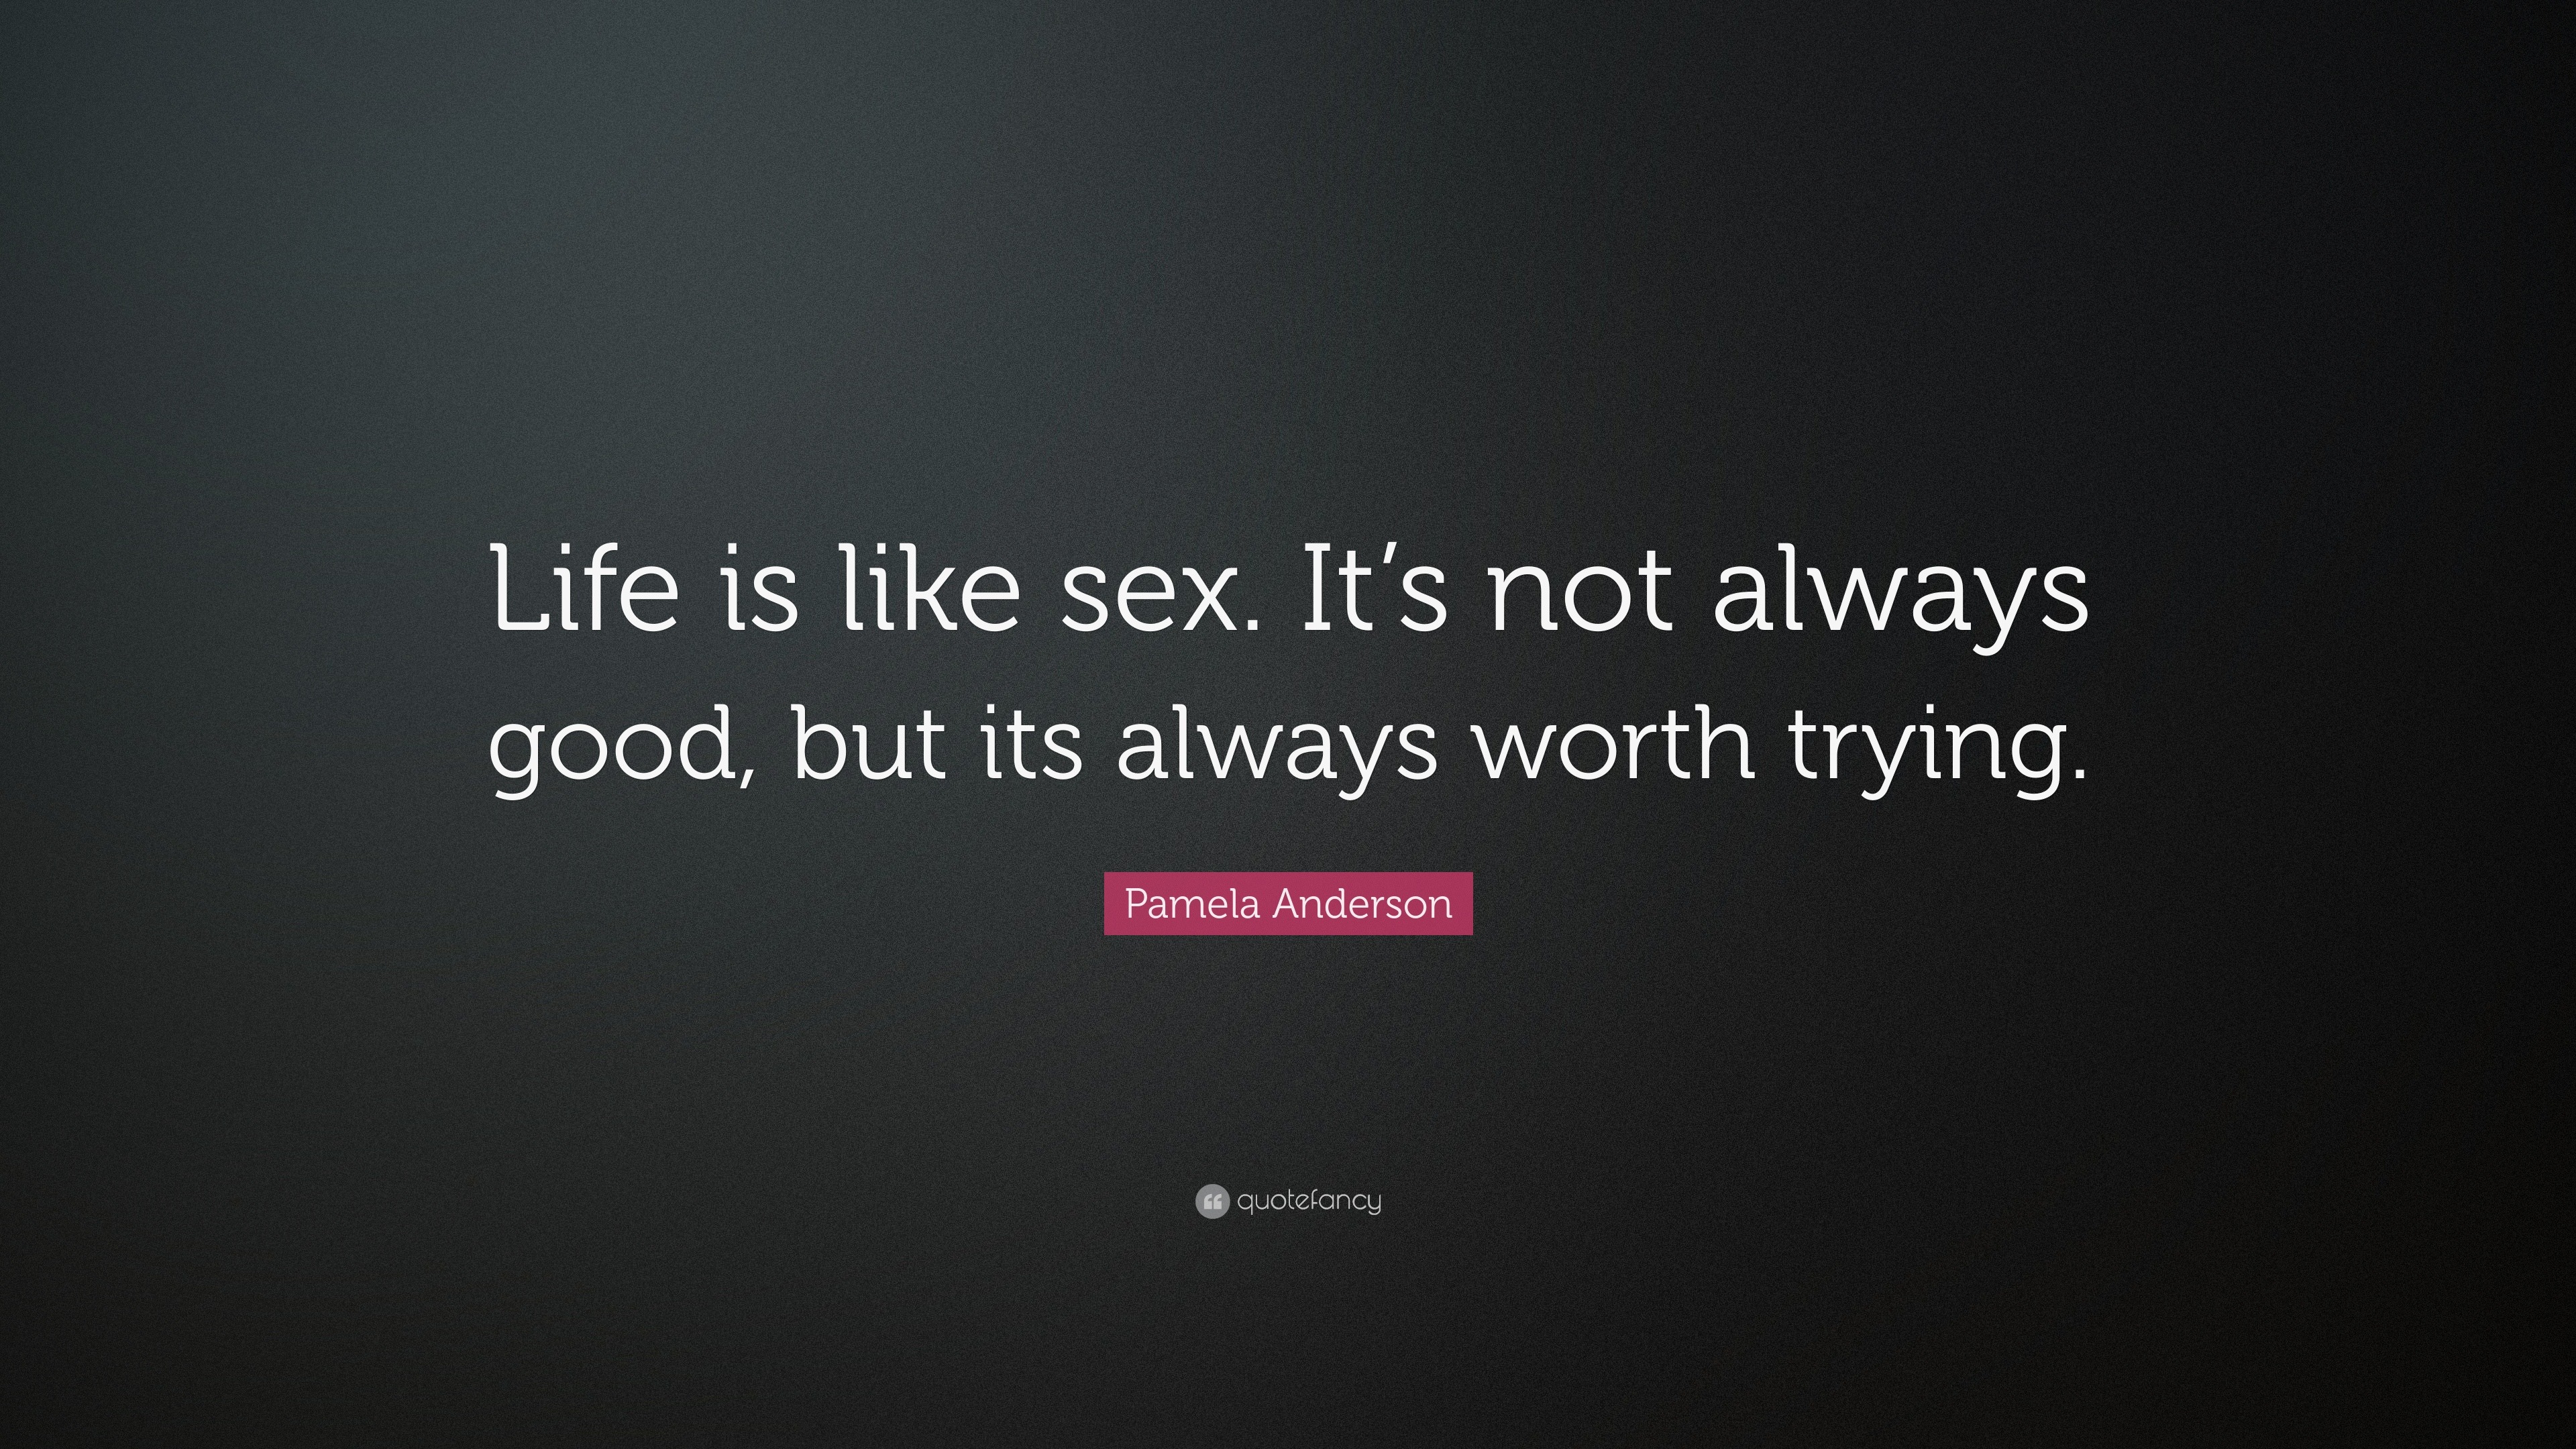 Pamela Anderson Quote “life Is Like Sex Its Not Always Good But Its